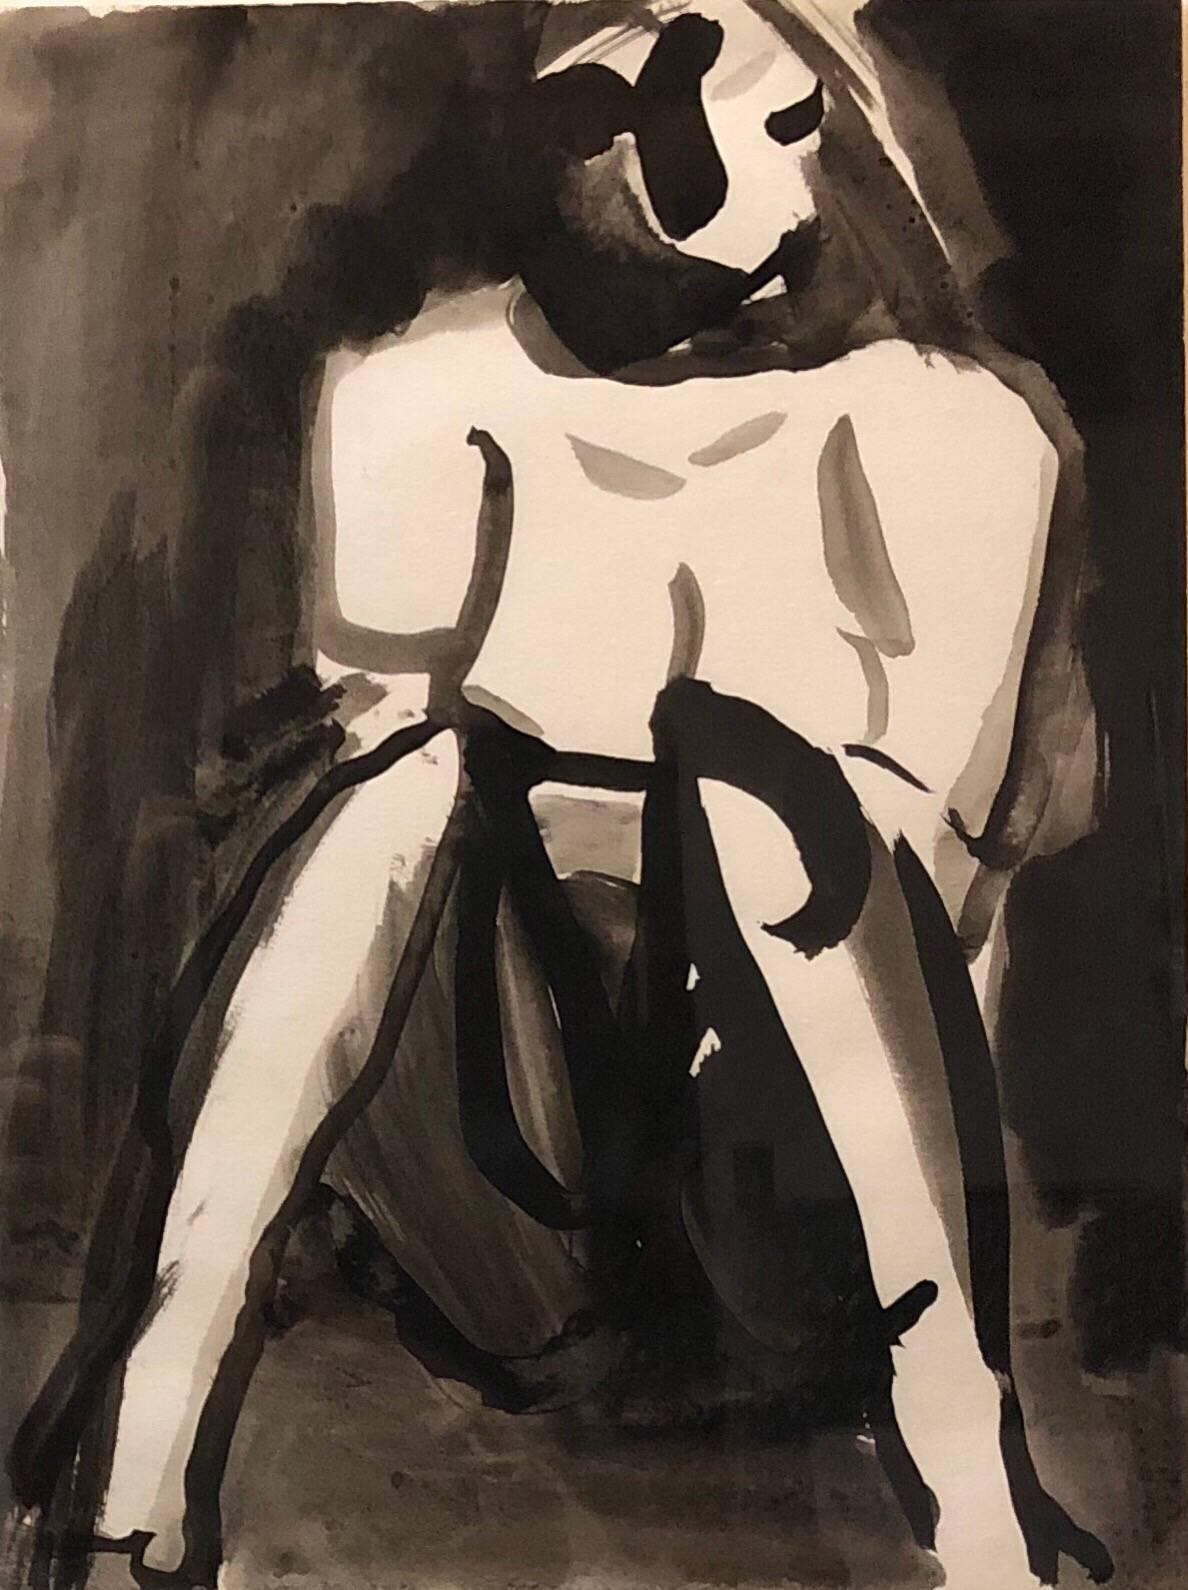 Abstract Figure Study of a Nude Woman Ink Watercolor Painting - Art by Jamie Marin-Price